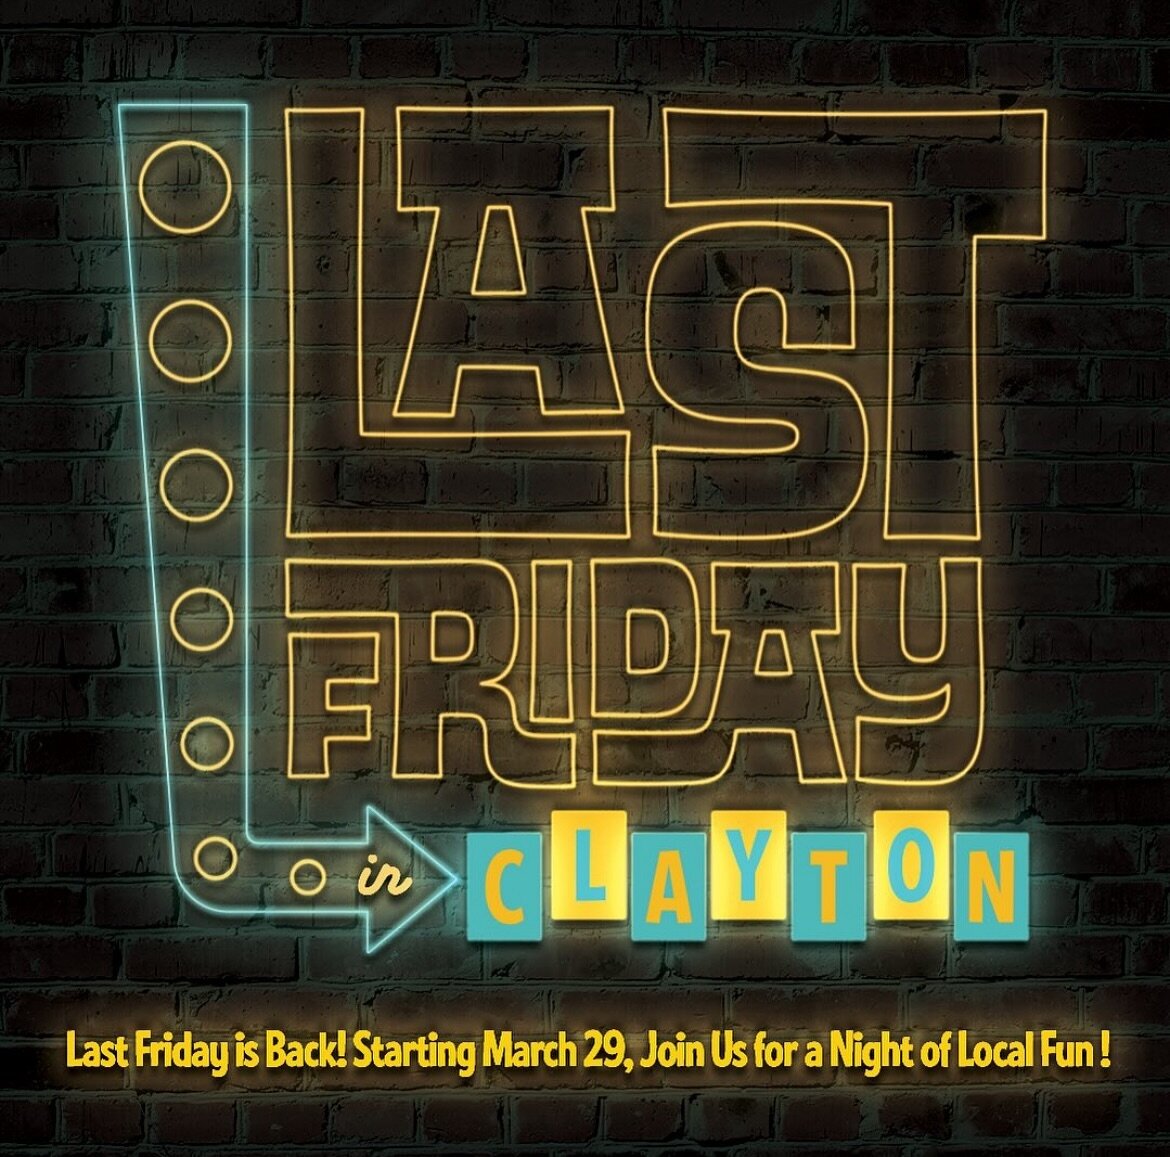 Last Friday in Clayton is approaching, and you&rsquo;re invited! Come have a fun-filled time with us downtown on March 29th, be there or be square! 🥳
#thequeenscourt
#lastfridayclayton 

&bull;
&bull;
&bull;
&bull;

#instagood #downtownclaytonnc #cl